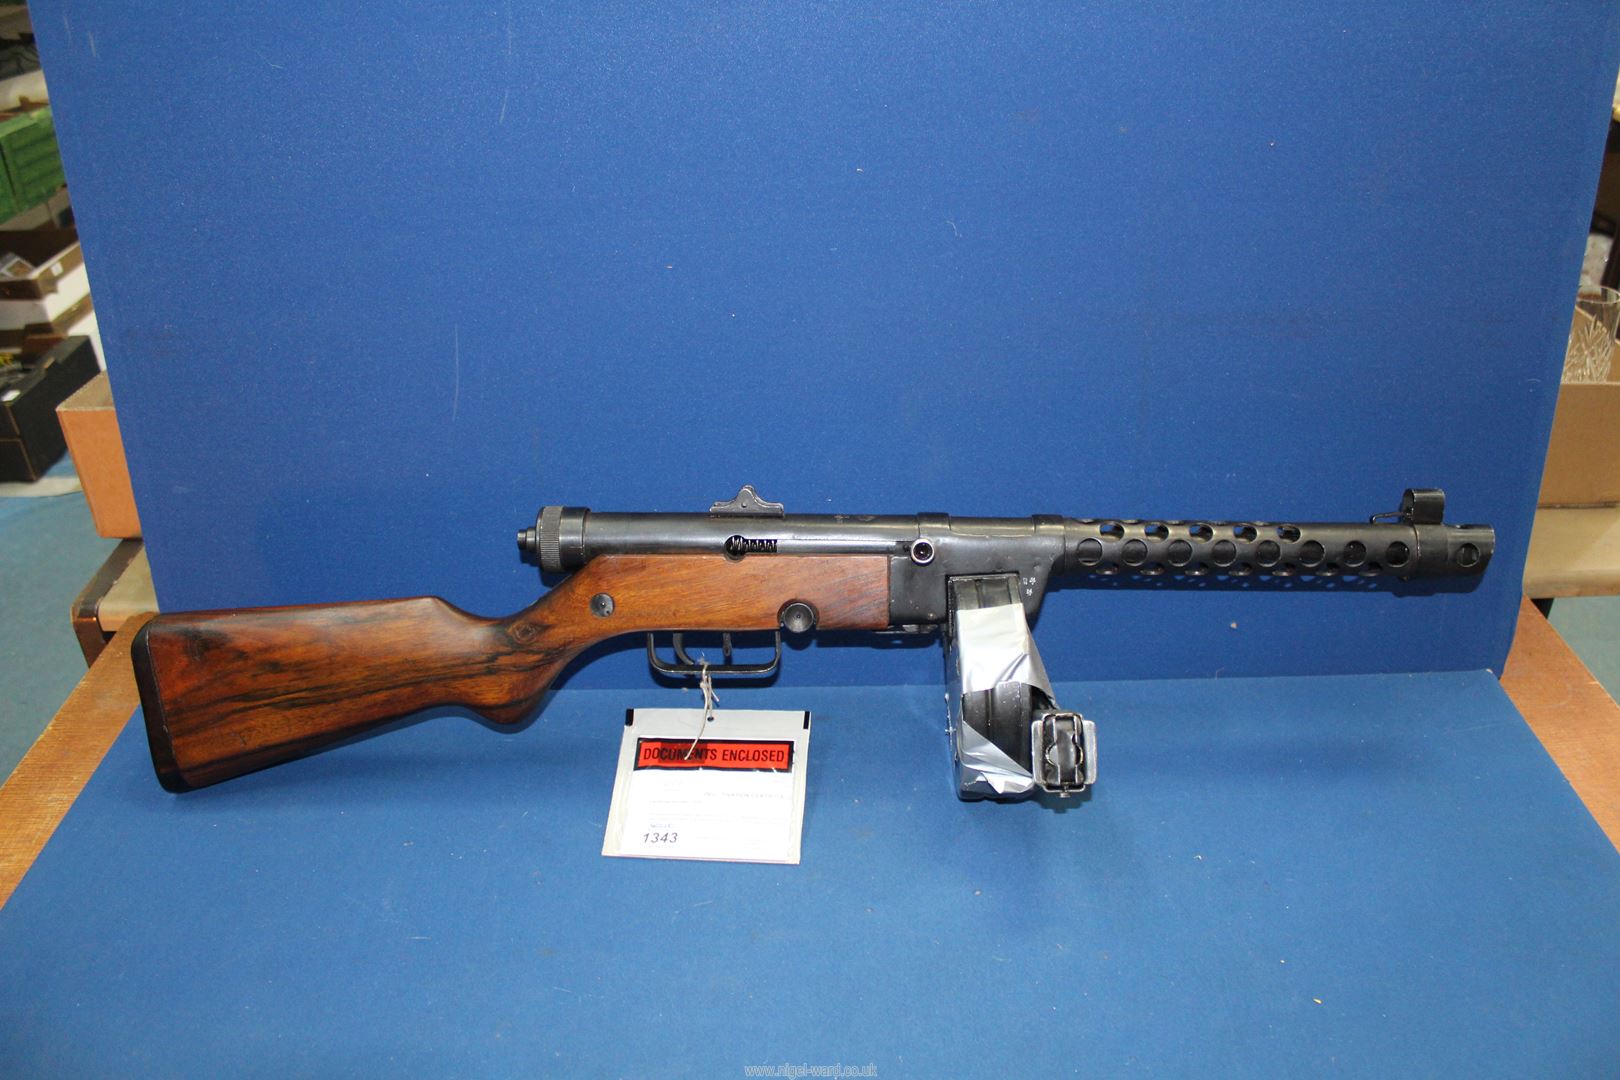 A post WWII M49 submachine gun with ventilated barrel to protect the operator during rapid fire,